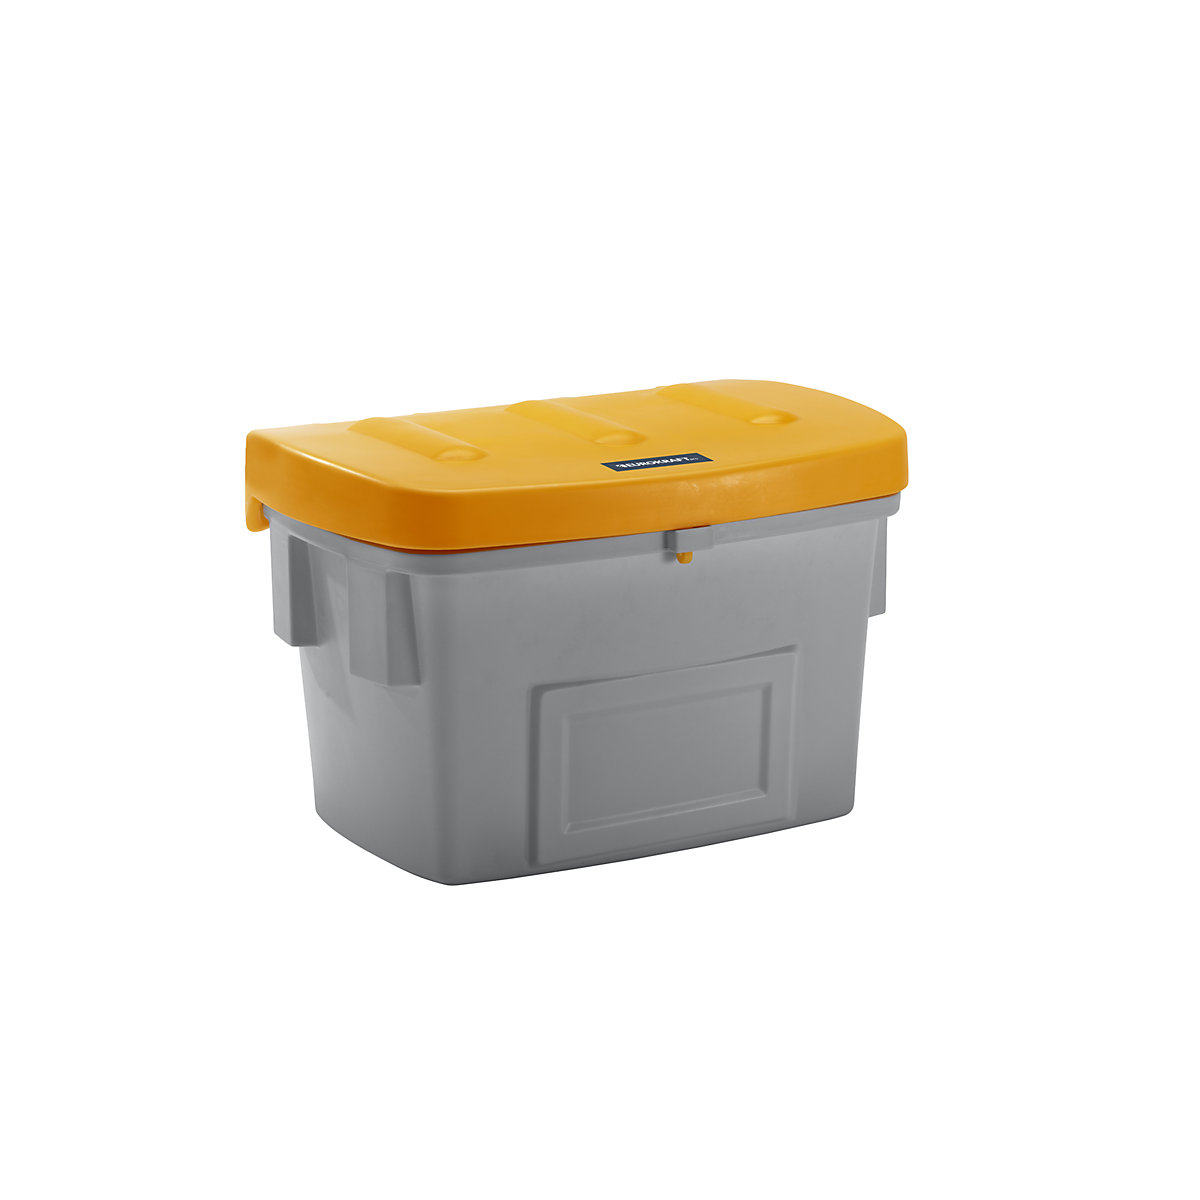 Universal / grit container – eurokraft pro, without dispenser opening, 200 l, orange lid-3